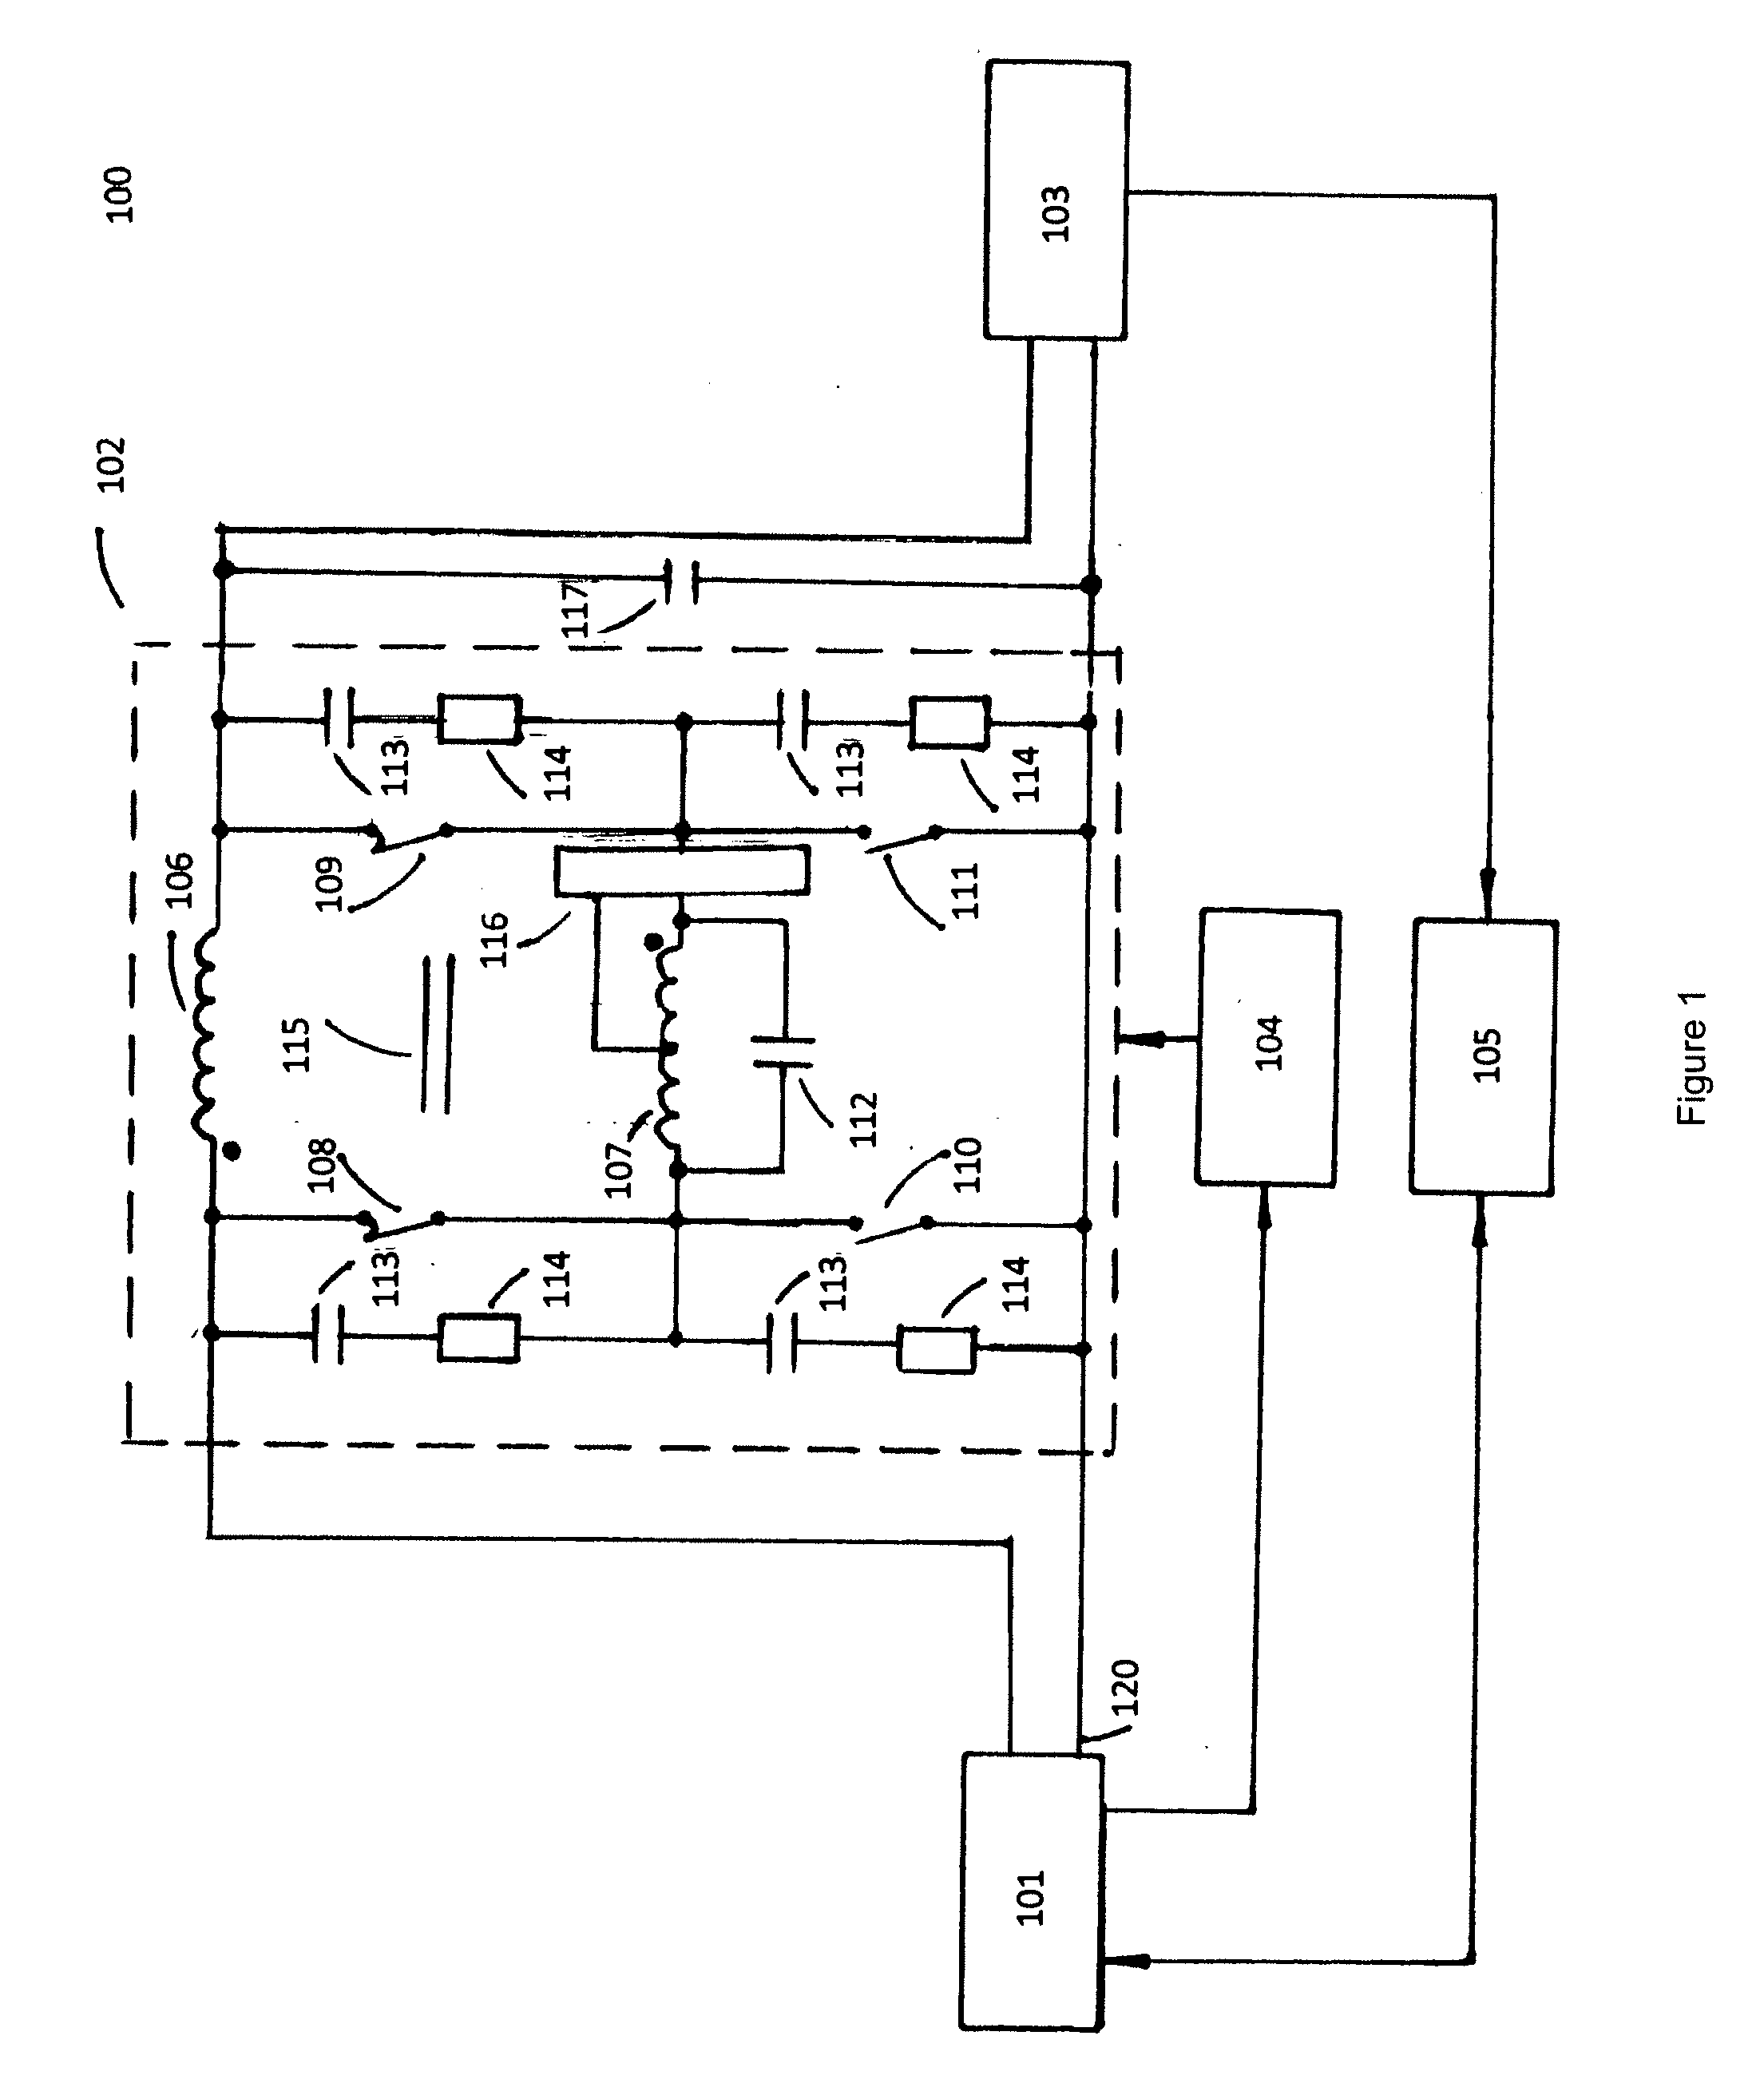 Method and apparatus for regulating voltage